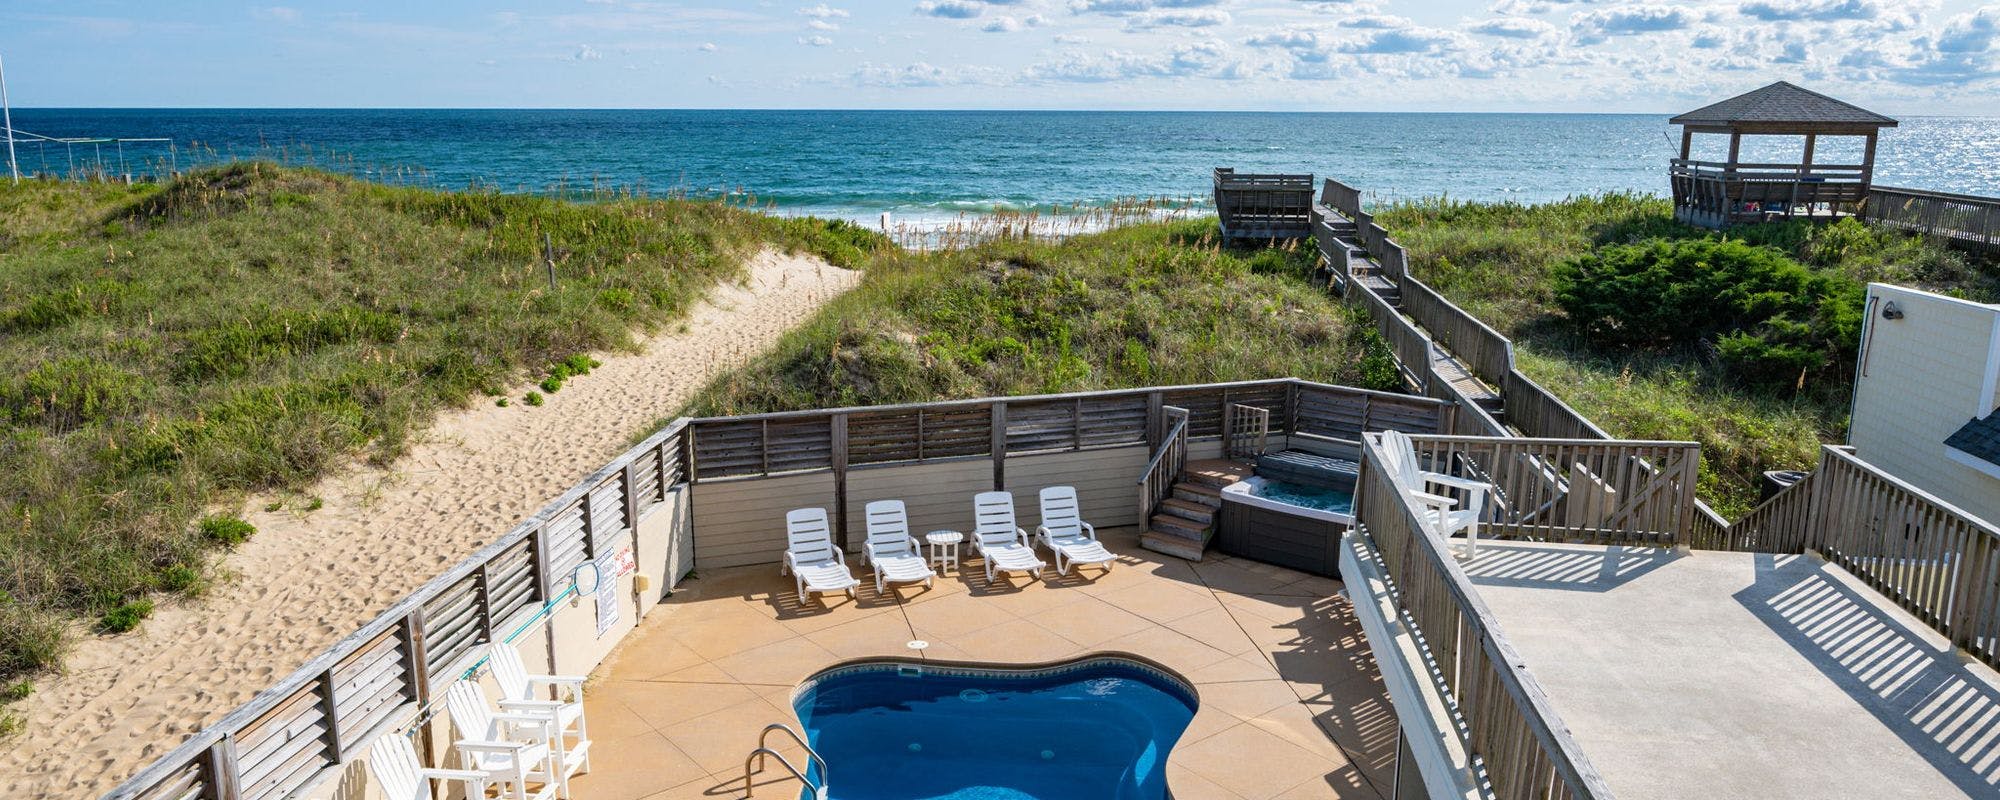 Oceanfront pool at an Outer Banks vacation rental